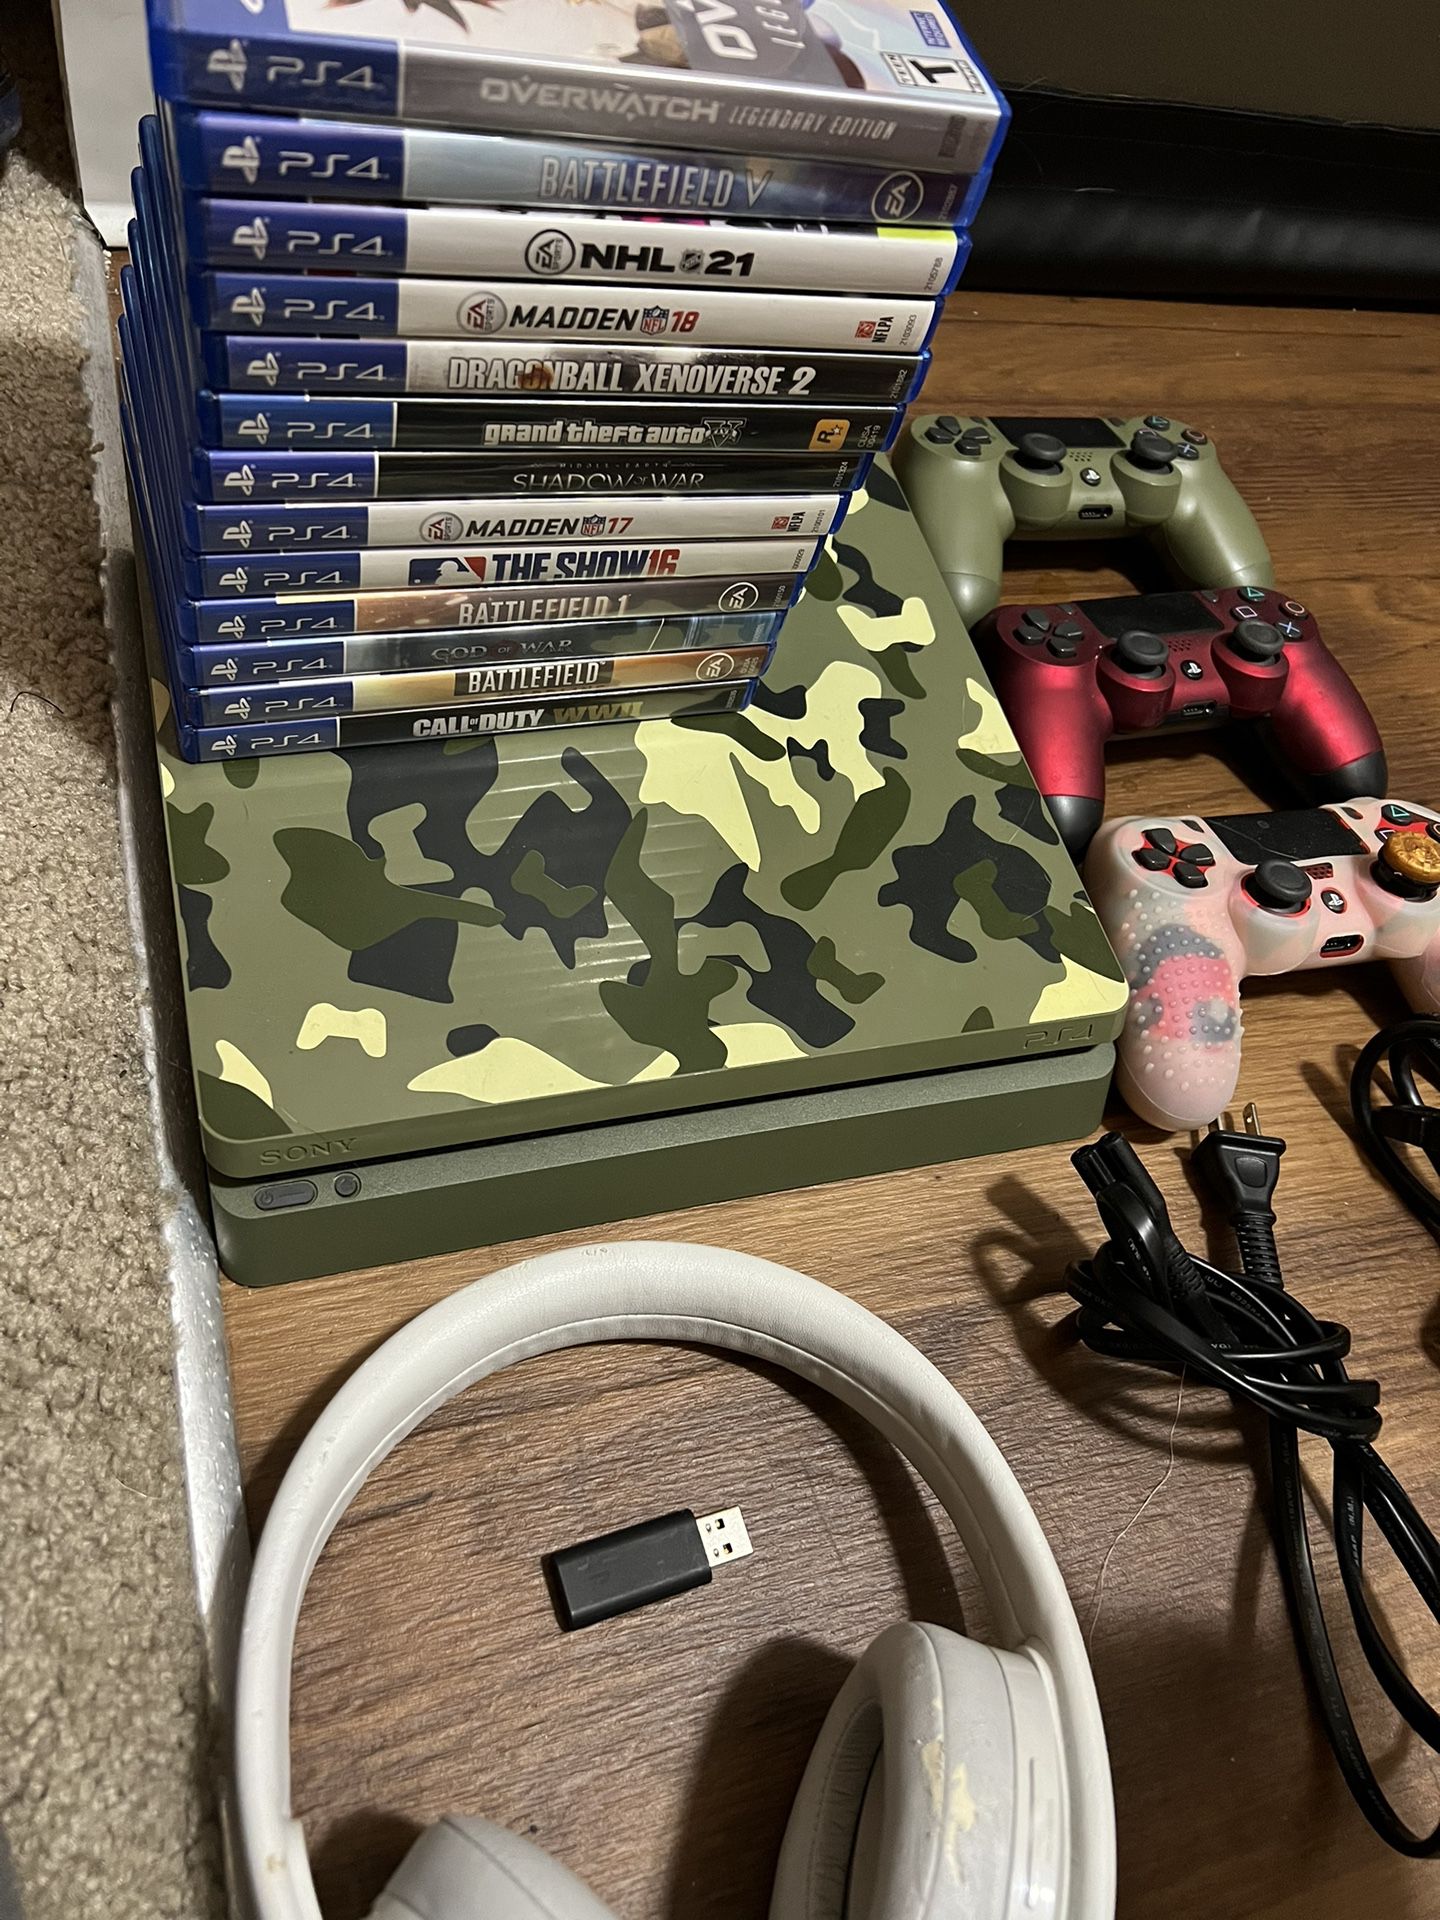 Used PS4 Console W/ Games, Controllers, & Headphones 